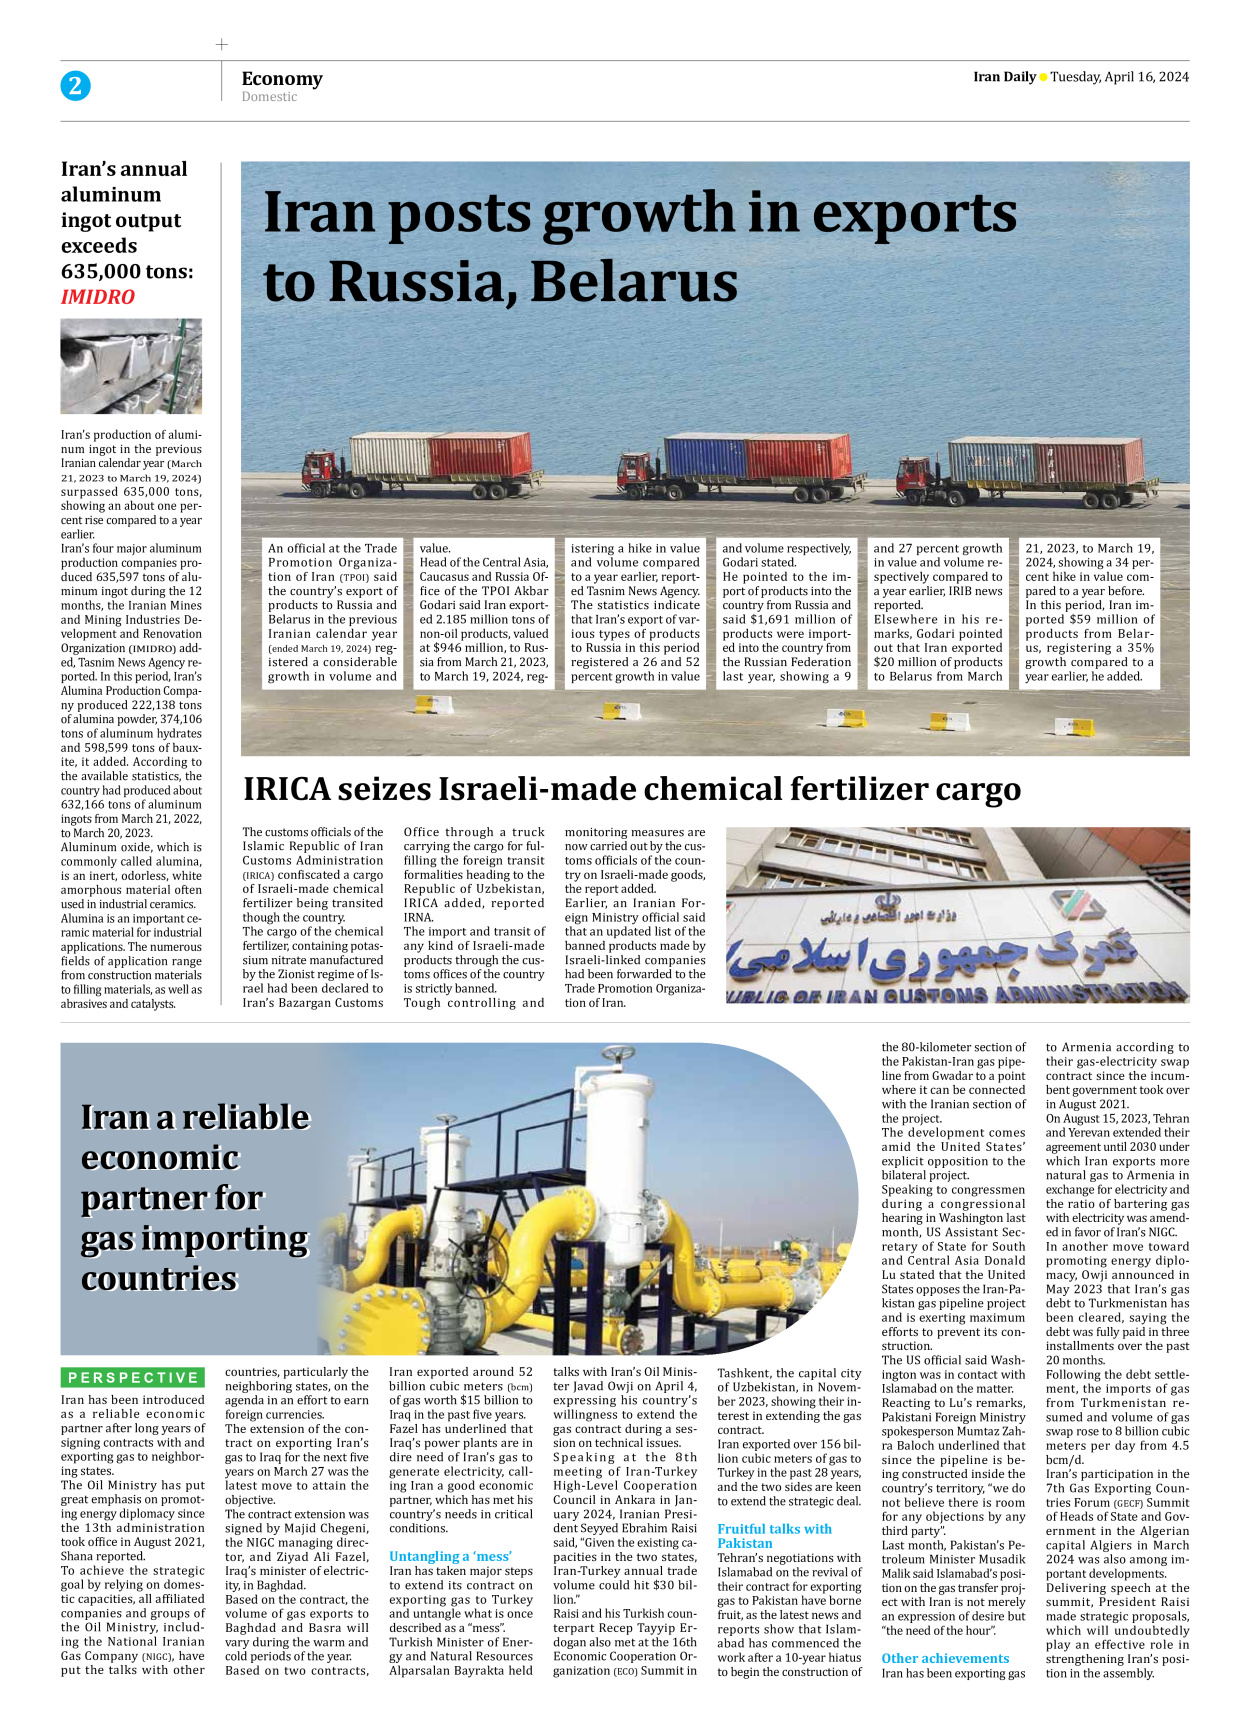 Iran Daily - Number Seven Thousand Five Hundred and Thirty Four - 16 April 2024 - Page 2